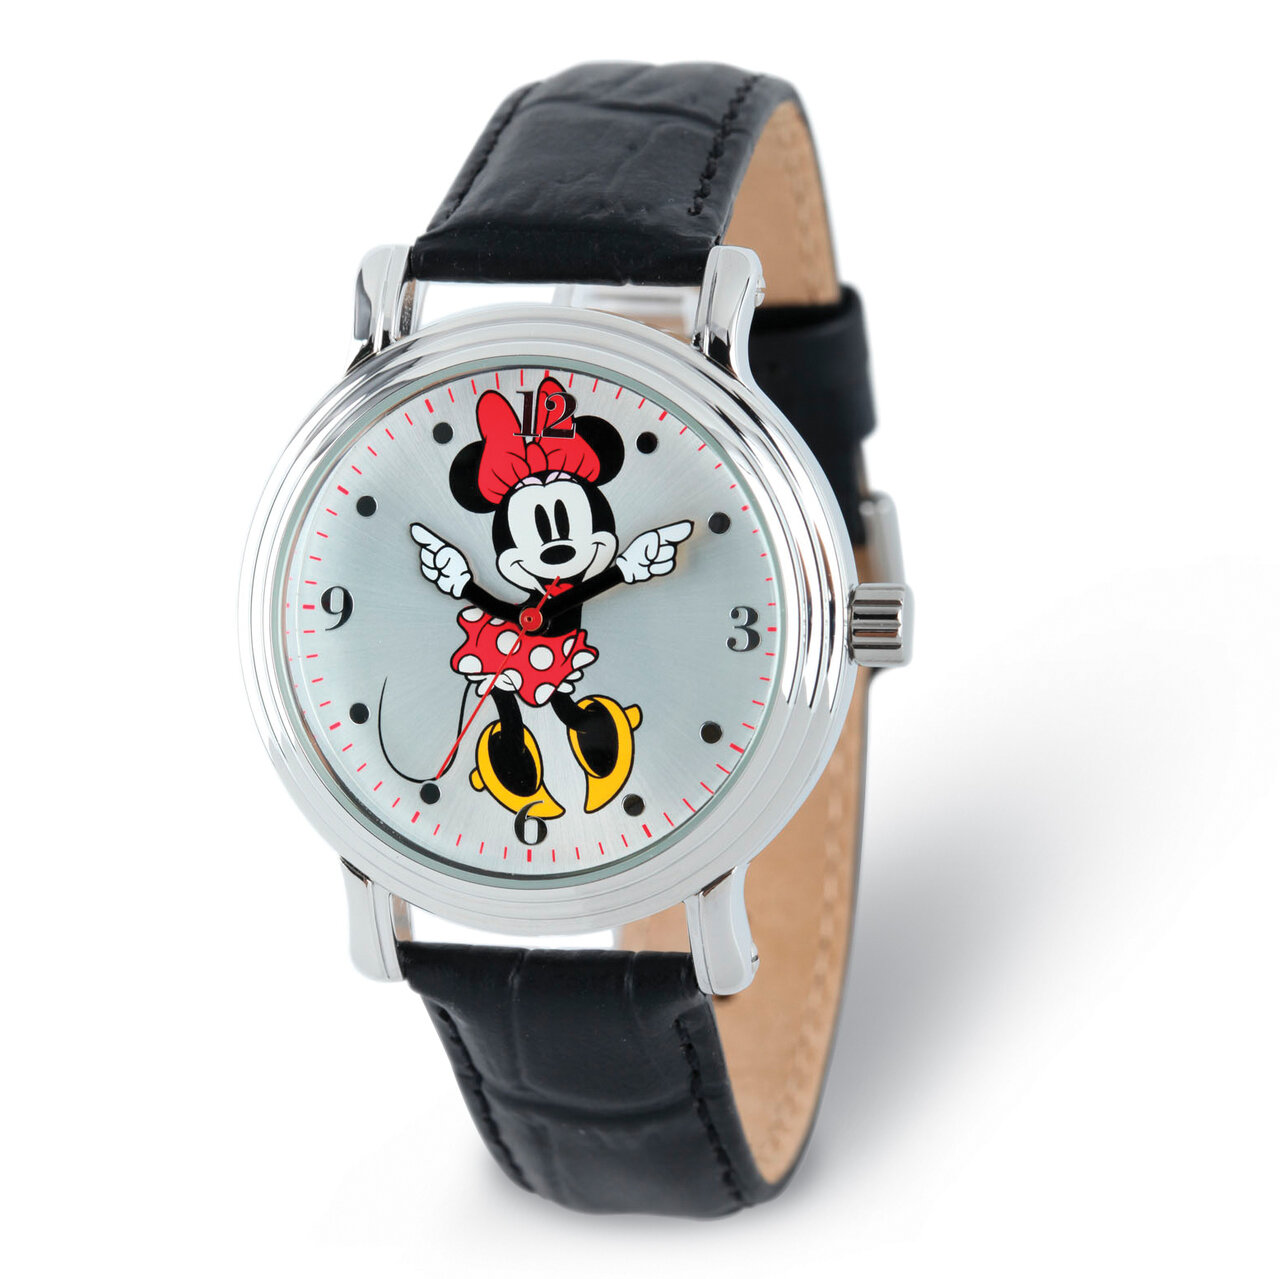 Disney Adult Size Black Strap Minnie Mouse with Moving Arms Watch XWA5763